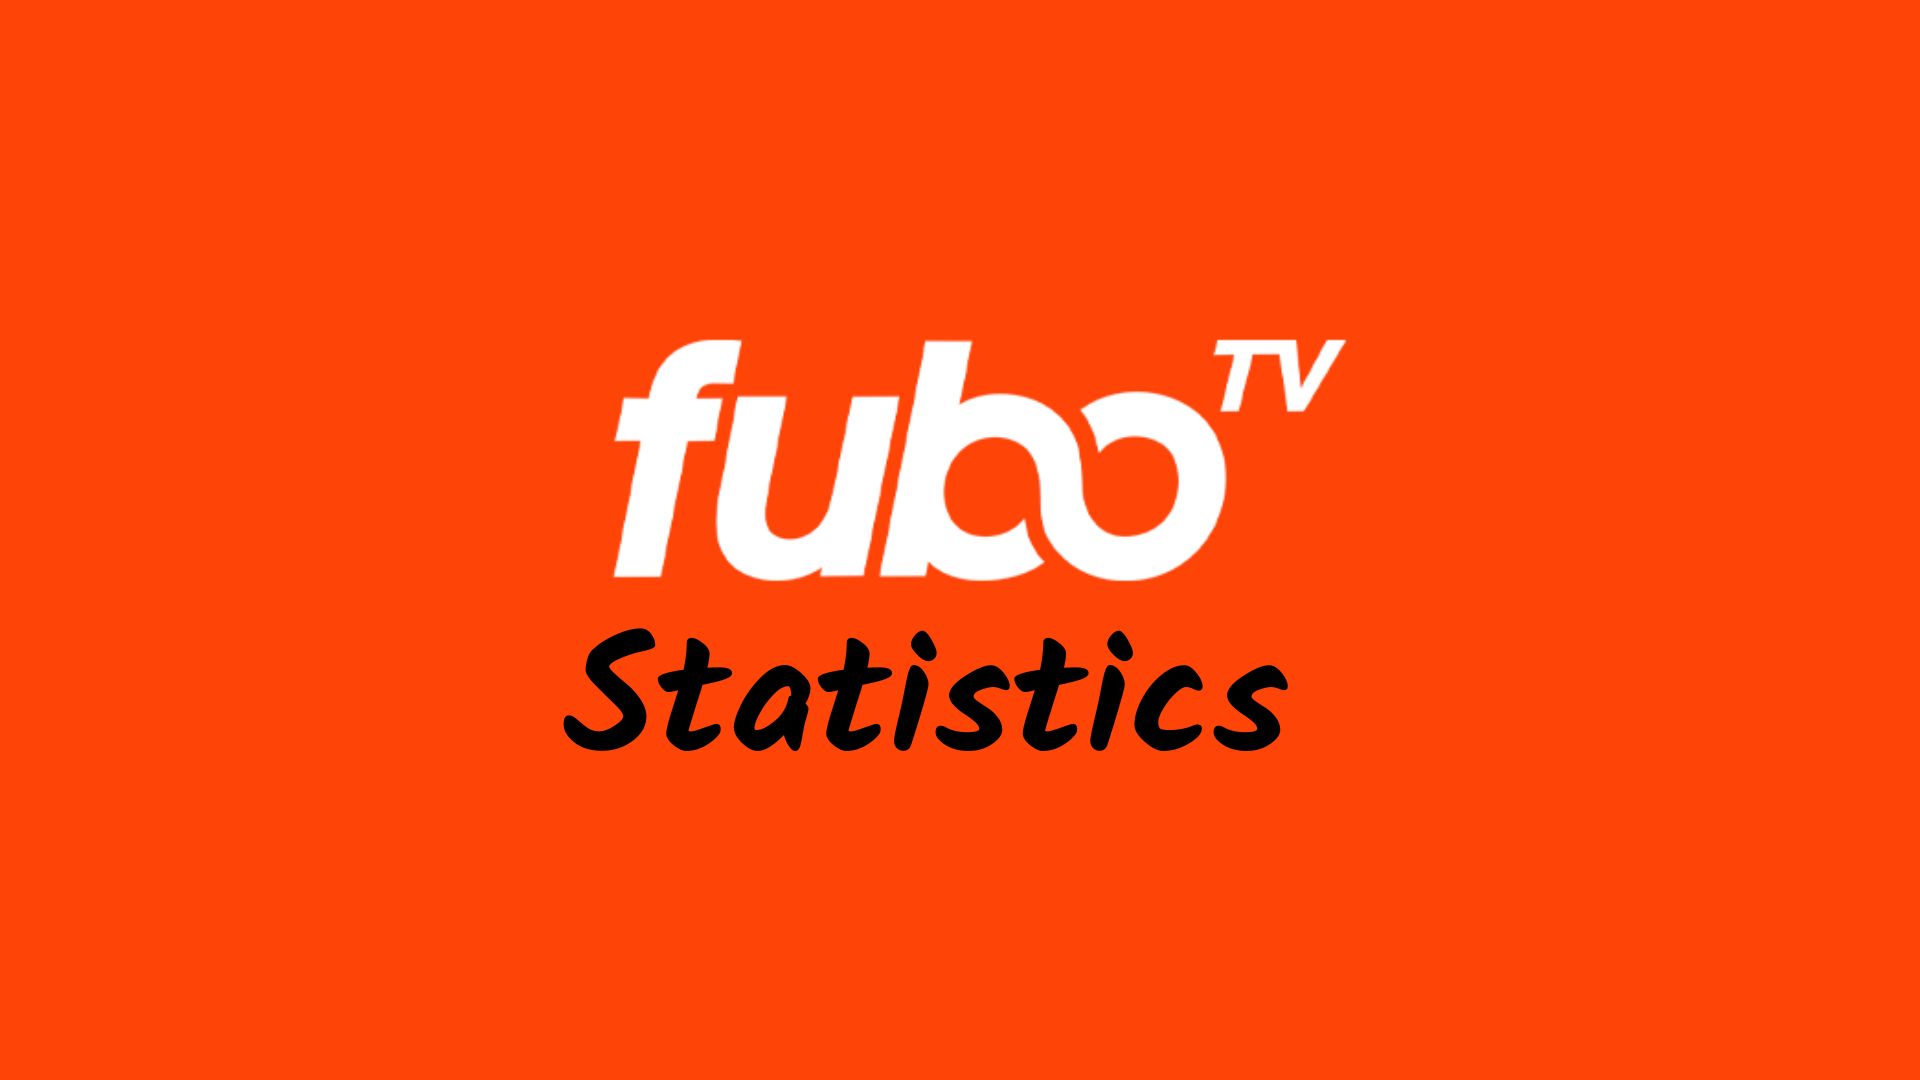 FuboTV Statistics – By Country, Paid Subscribers, Revenue, Brand Awareness